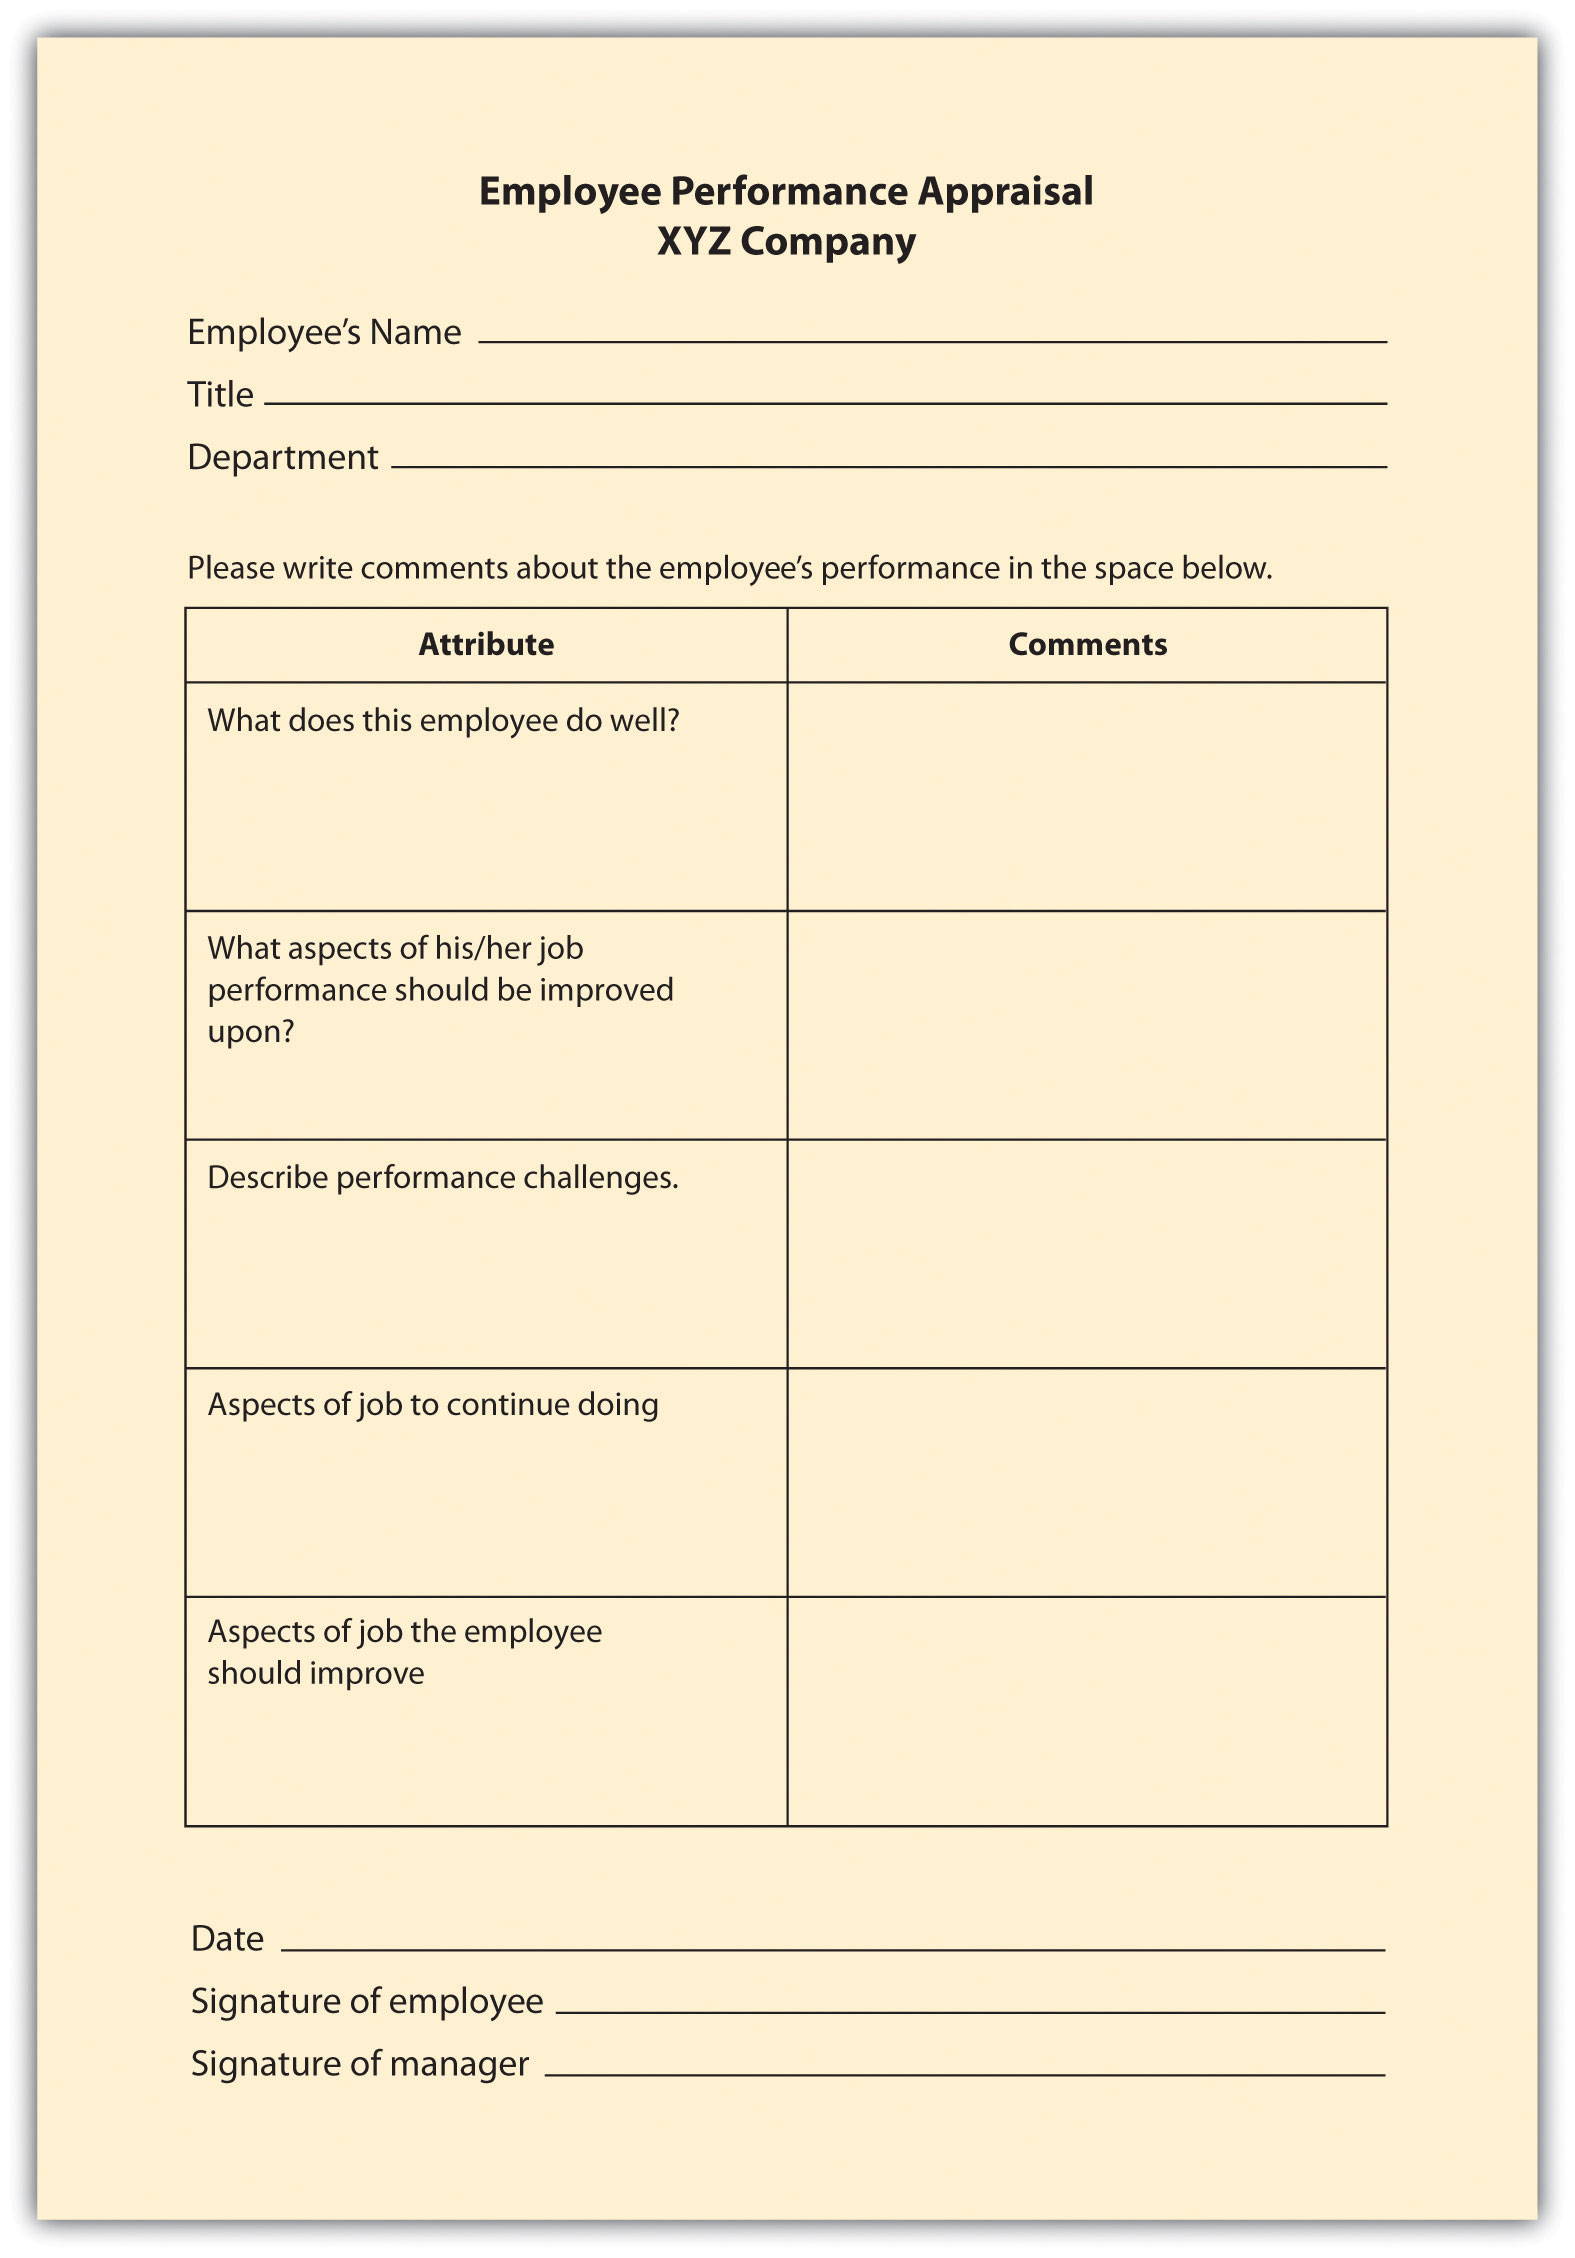 Performance Appraisal Sample For Employees | PDF Template